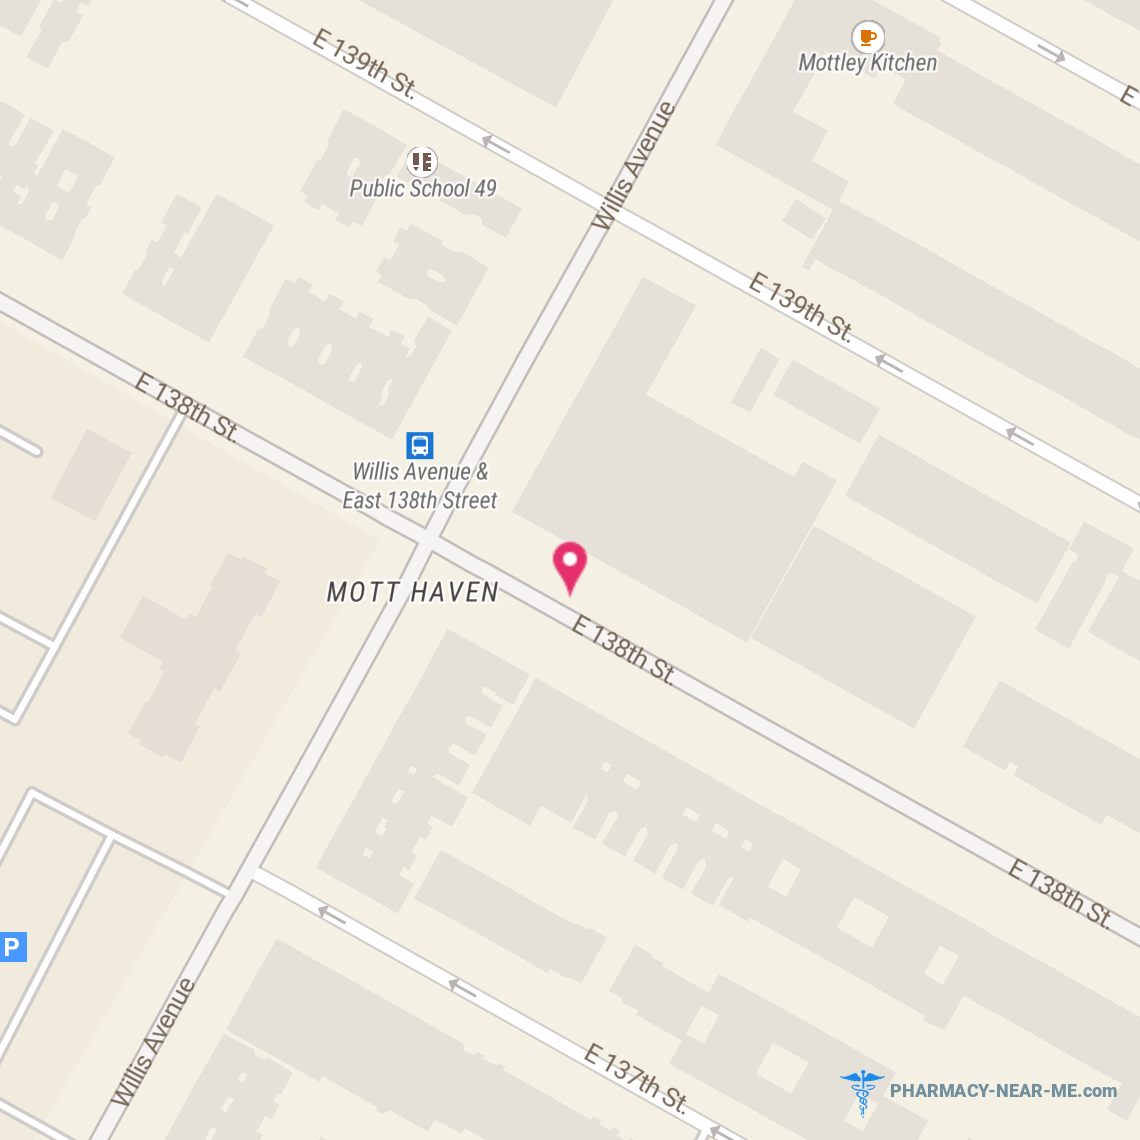 ONE DRUG CORP - Pharmacy Hours, Phone, Reviews & Information: 411 East 138th Street, Bronx, New York 10454, United States